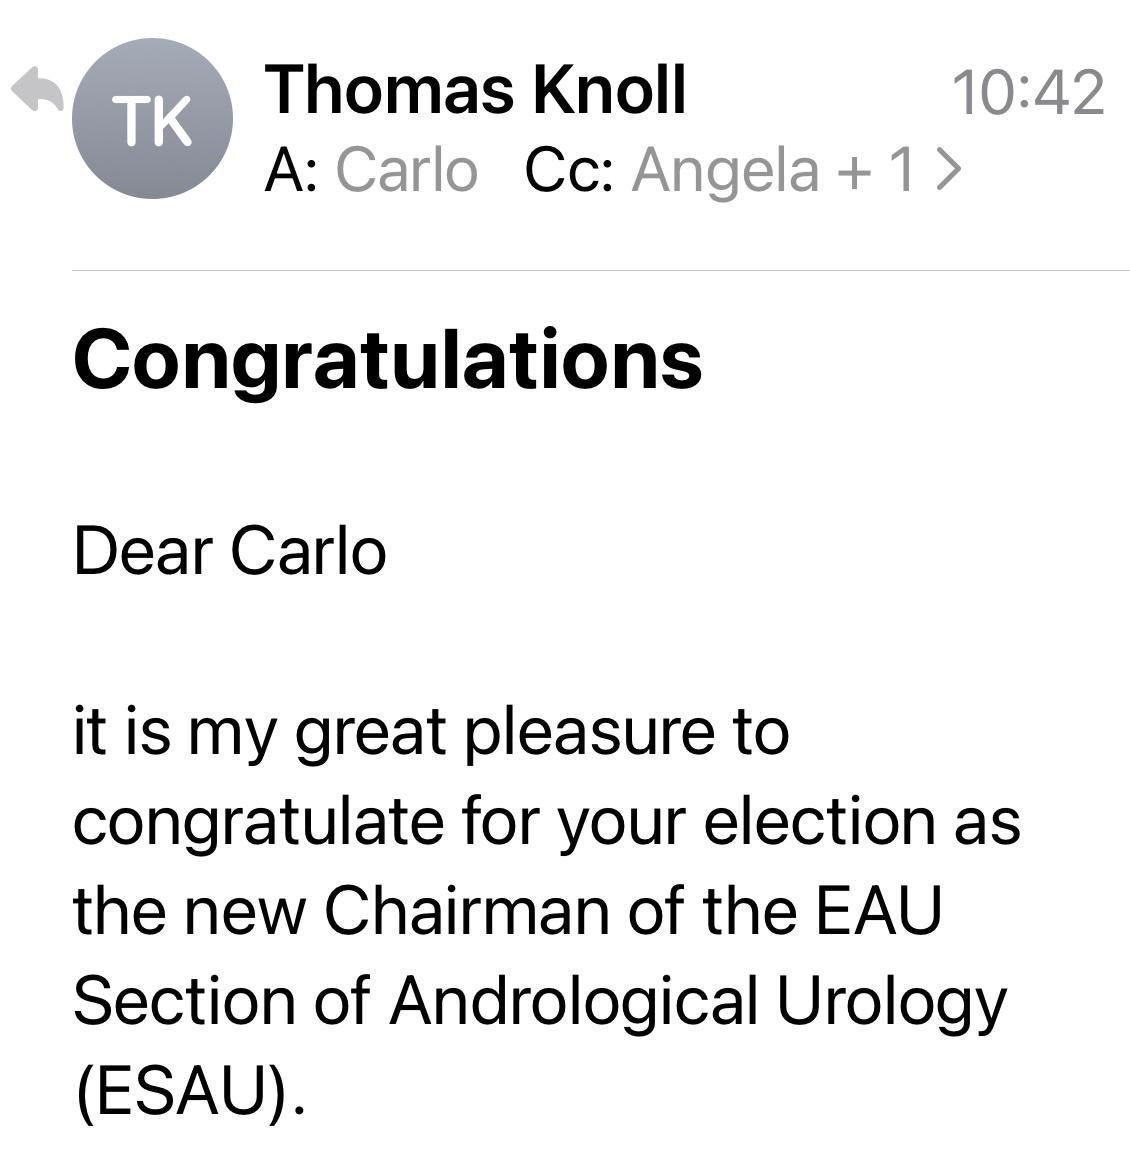 Today I have been nominated Chairman of the Andrological Urology by the European Urological Association (#EAU). I am very proud of this amazing position that represent the a long period of study and research in this field. @Uroweb